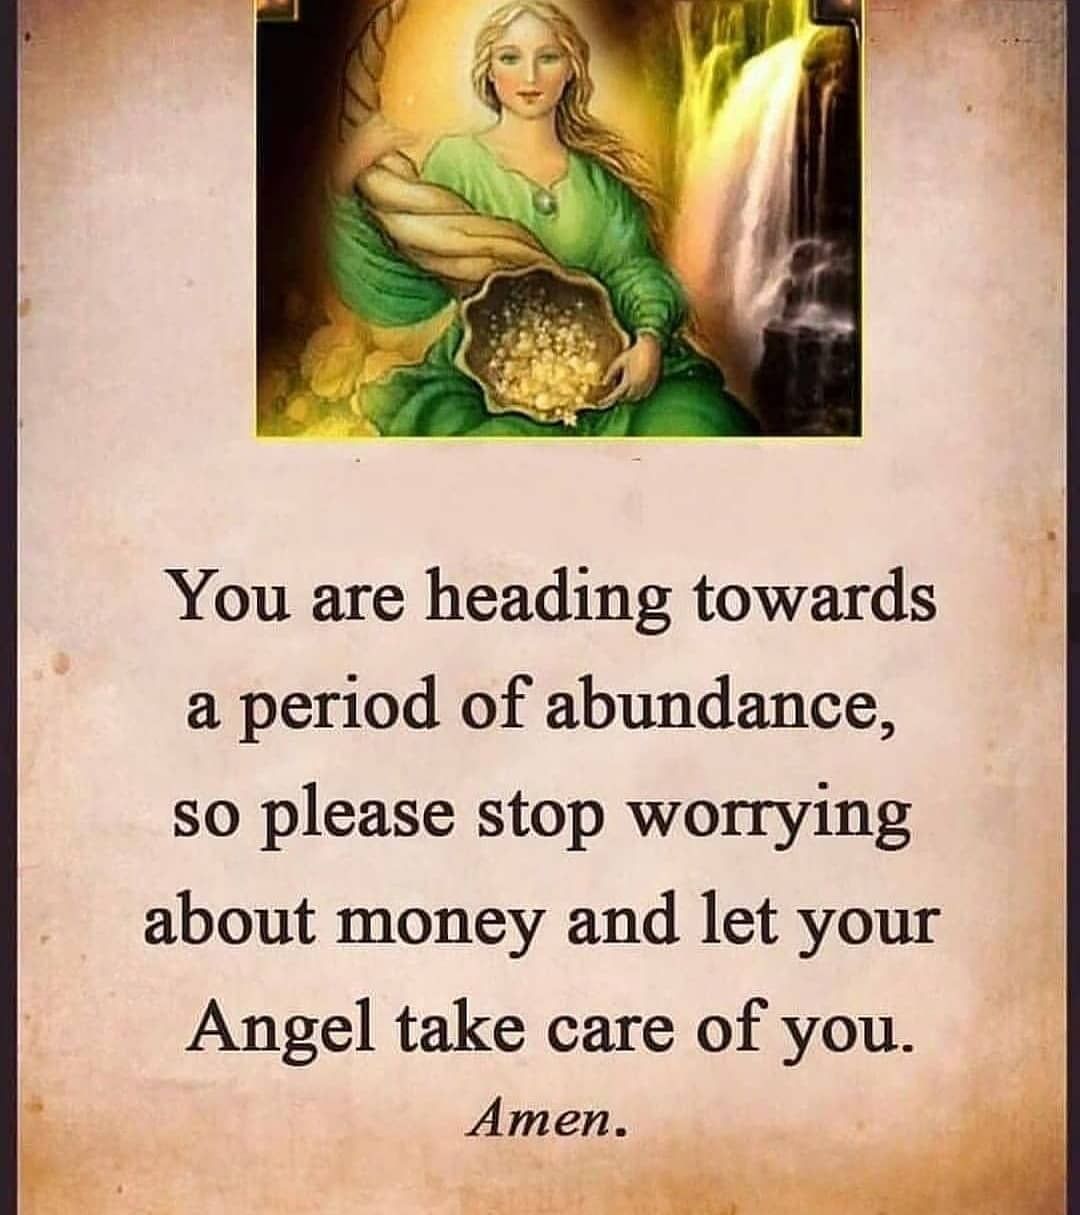 You are heading towards a period of abundance, so please stop worrying about money and let your Angel take care of you. Amen.